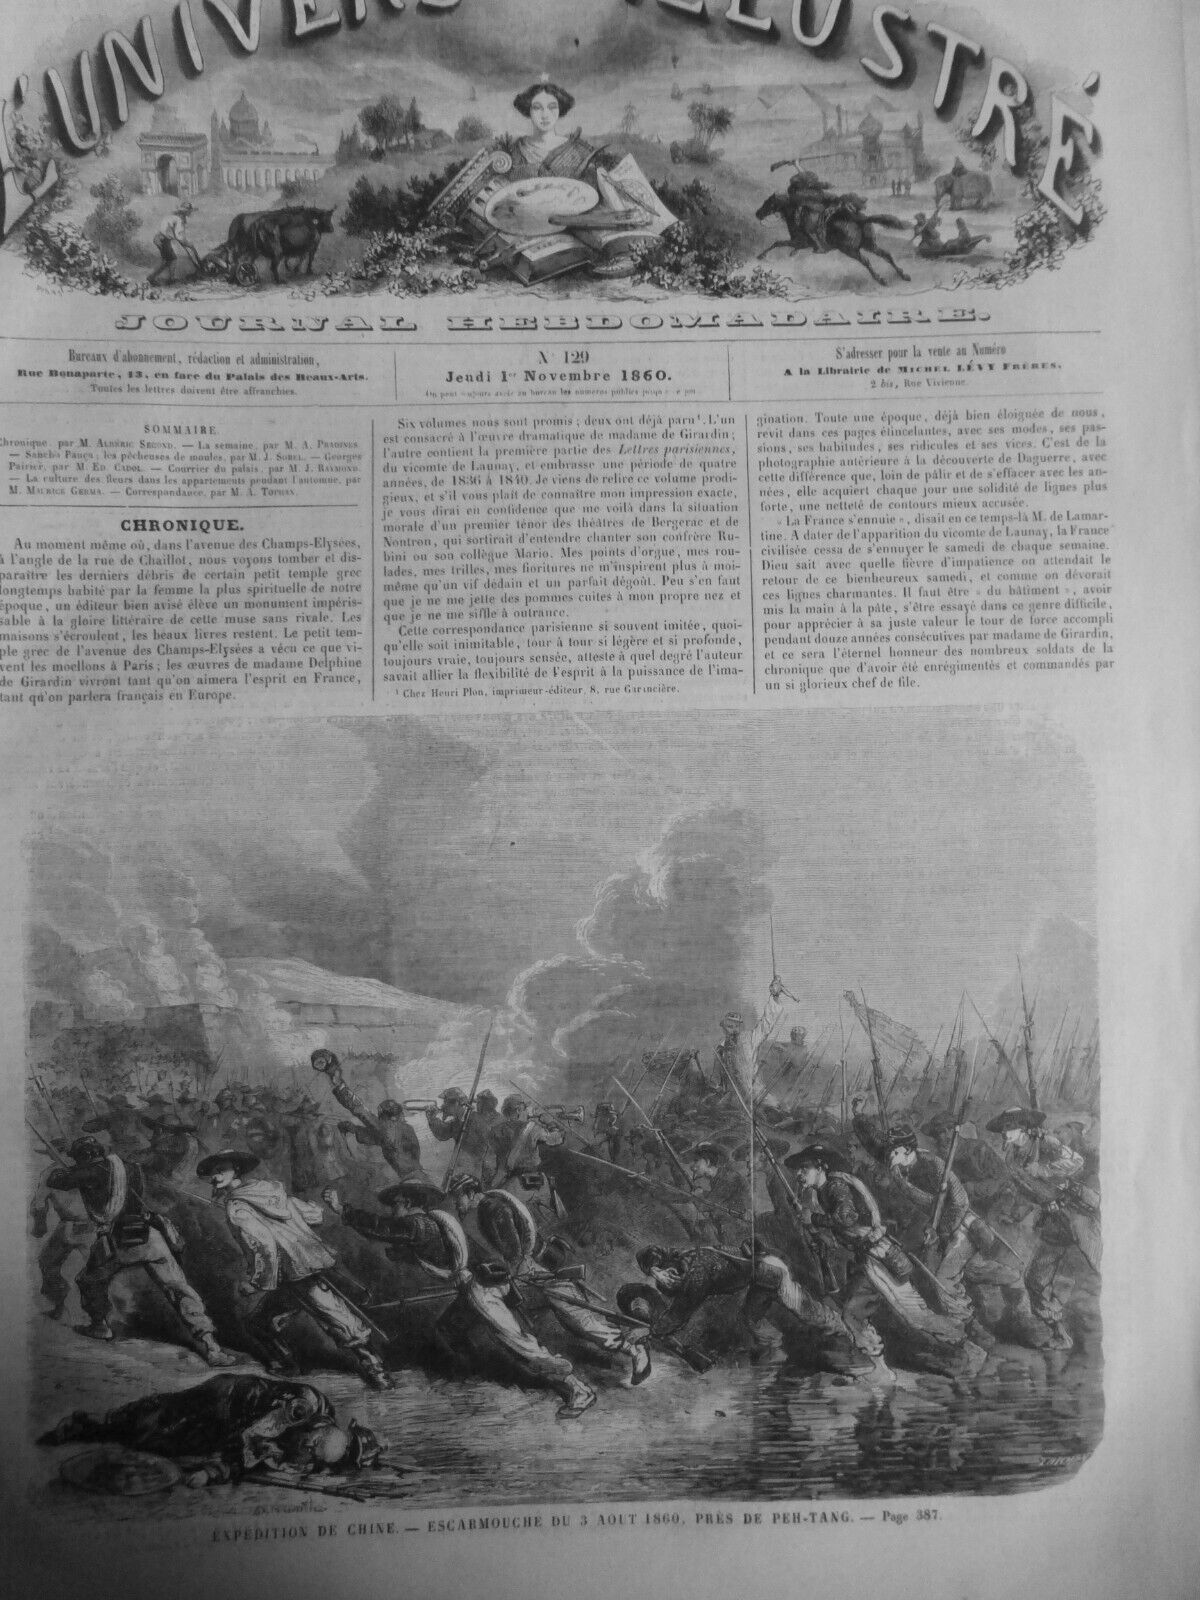 1860 CHINESE REPUBLIC LANDING ALLIES FRANCE ANGLATERRE 2 NEWSPAPERS ANTIQUE